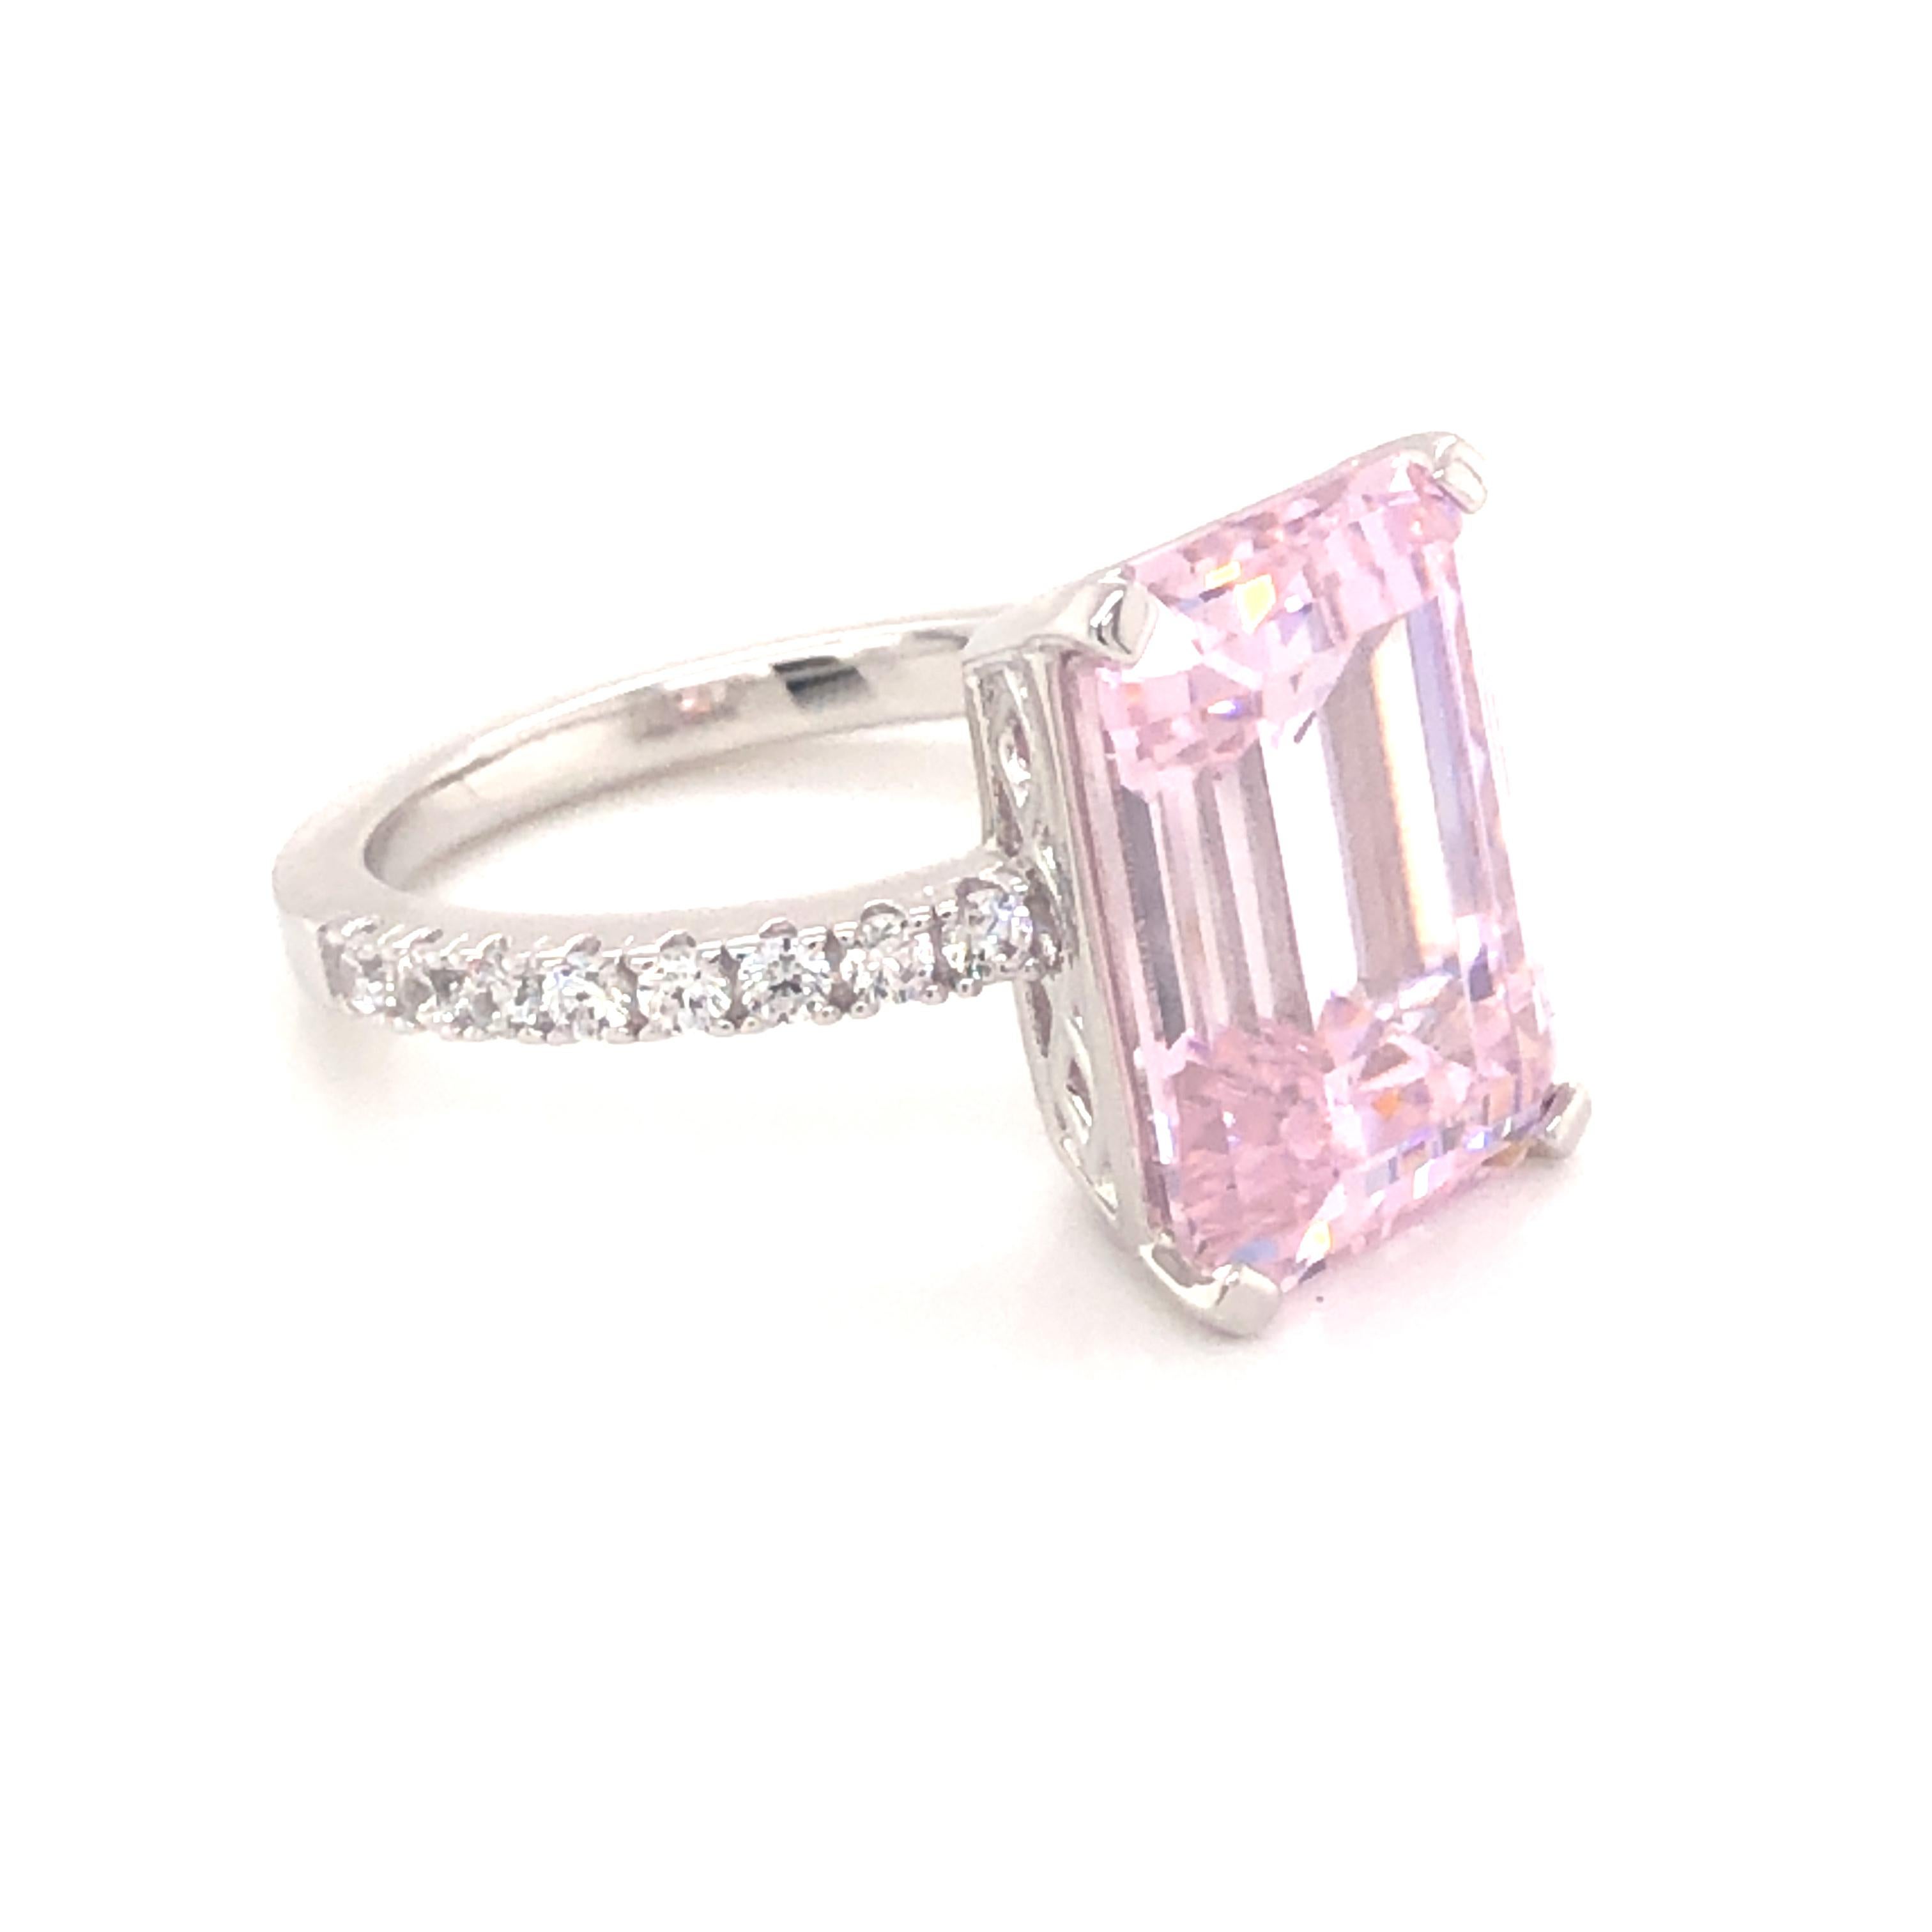 Striking pink hues radiate from this stunning statement piece. 

Featuring a large 8.00ct pale pink spinel emerald cut, with 0.32ct of round brilliant cuts on the shoulders, set in platinum on 925 sterling silver.
Other sizes available. 

Whether